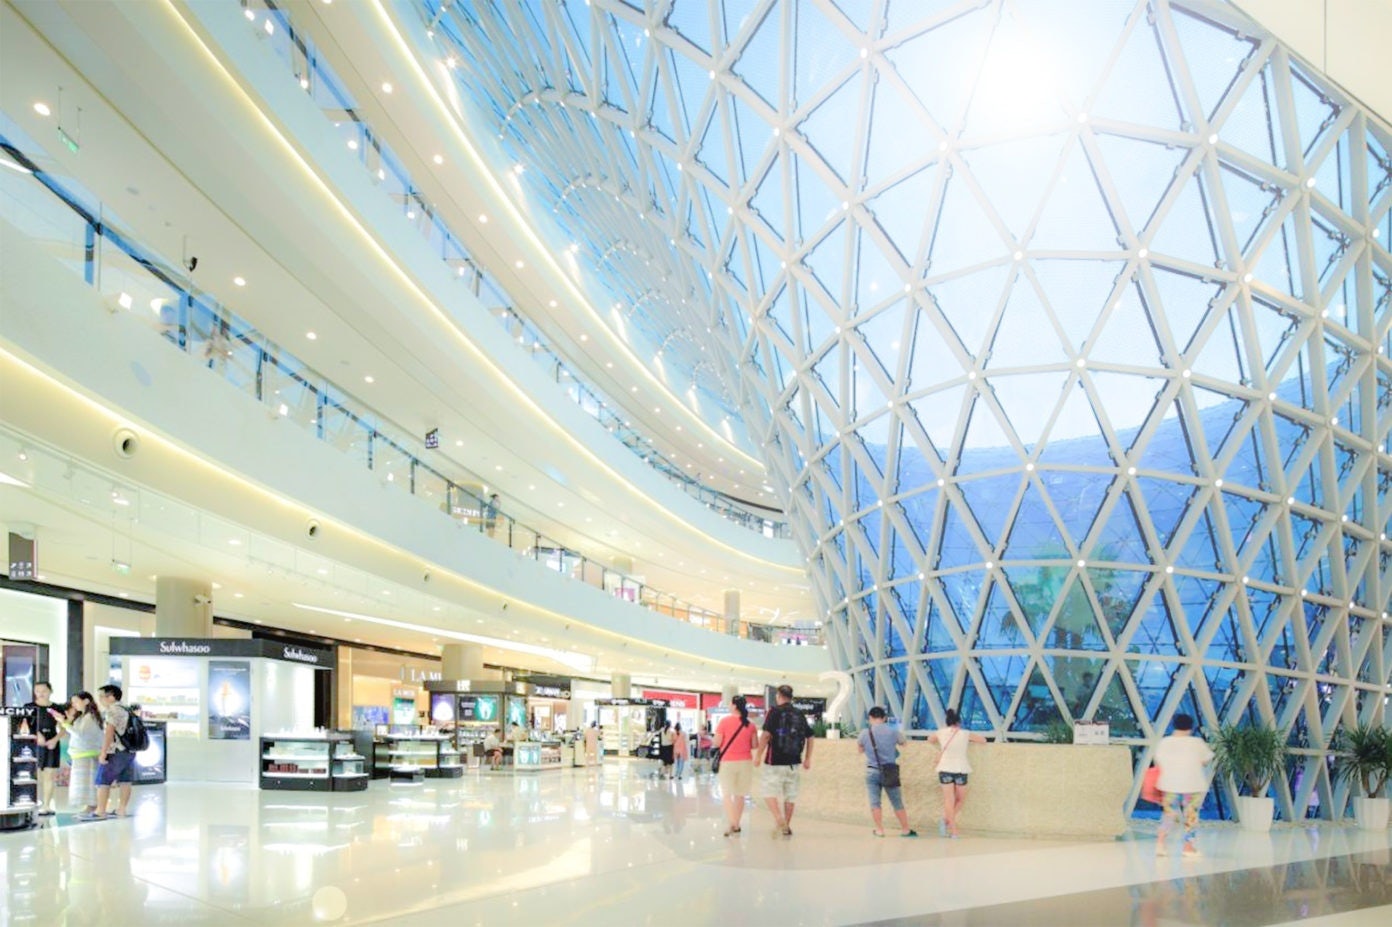 China is trying to keep duty-free spending at home with the CDF Mall in Sanya, Hainan province. Photo: CDF Mall
